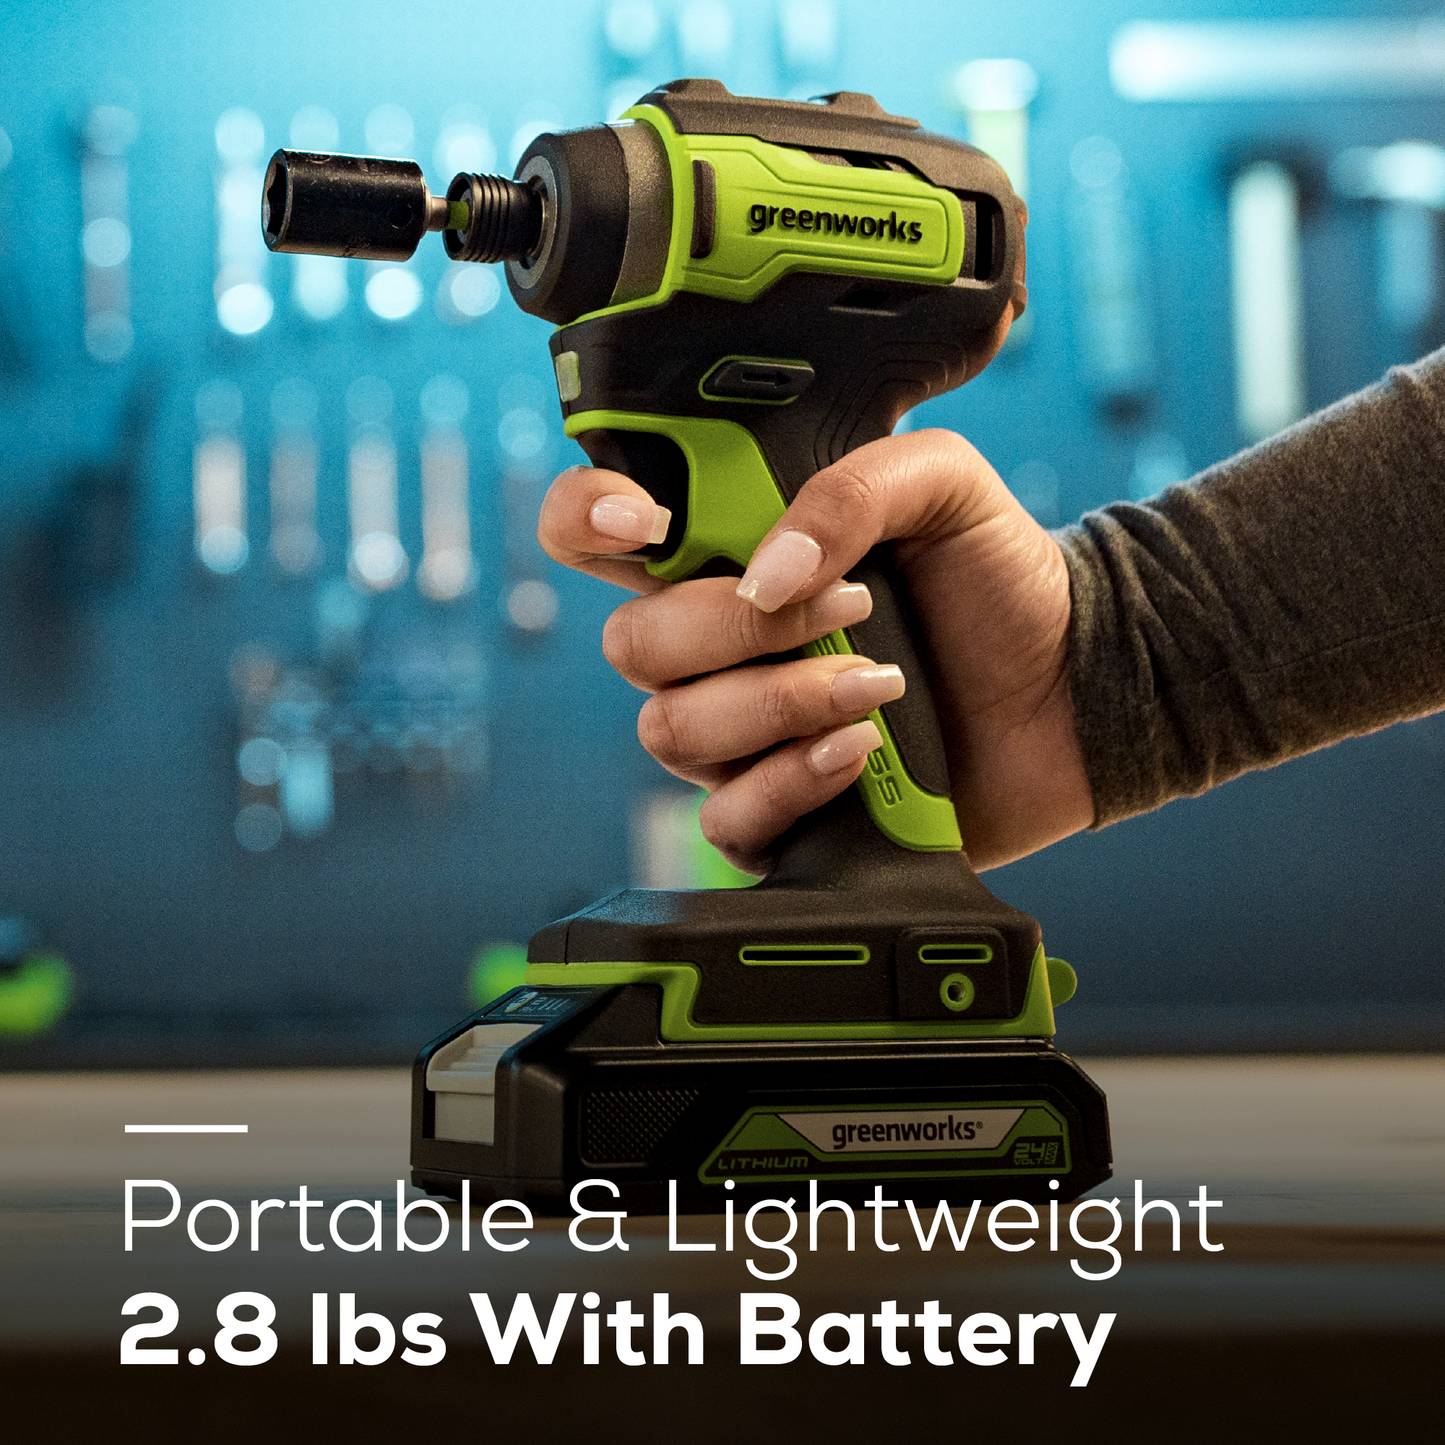 24V 1/4" 1950 in/lbs Brushless Impact Driver Kit w/ (2) 2.0Ah Batteries, Charger, Bits and Tool Bag